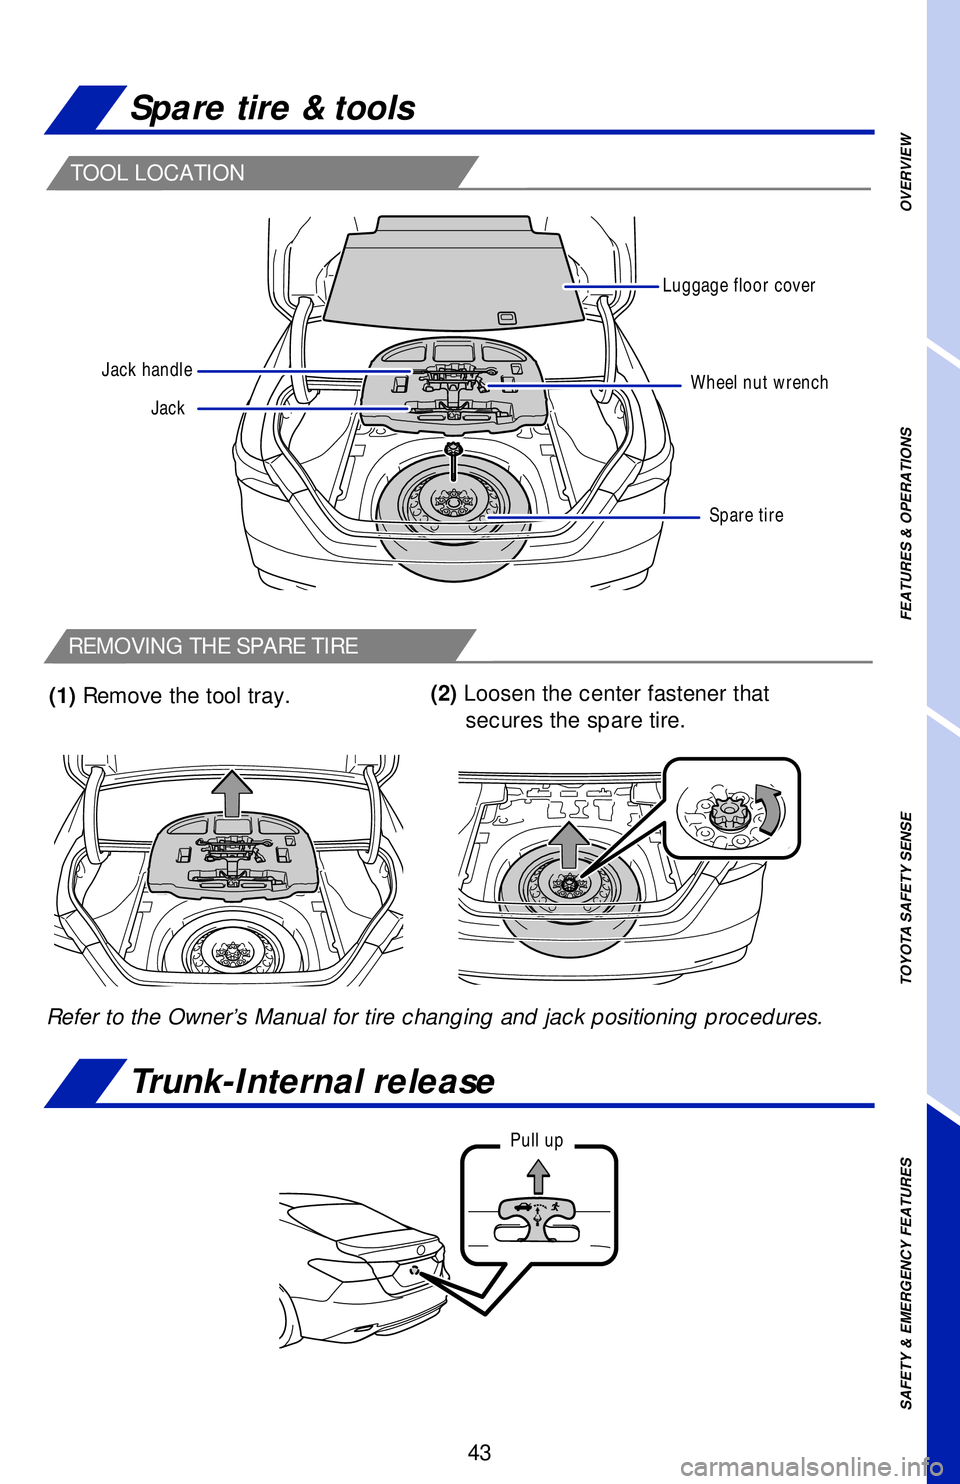 TOYOTA CAMRY 2019  Owners Manual (in English) 43
TOOL LOCATION
REMOVING THE SPARE TIRE
Spare tire & tools
Trunk-Internal release
(1) Remove the tool tray.
Refer to the Owner’s Manual for tire changing and jack positioning procedures.(2) Loosen 